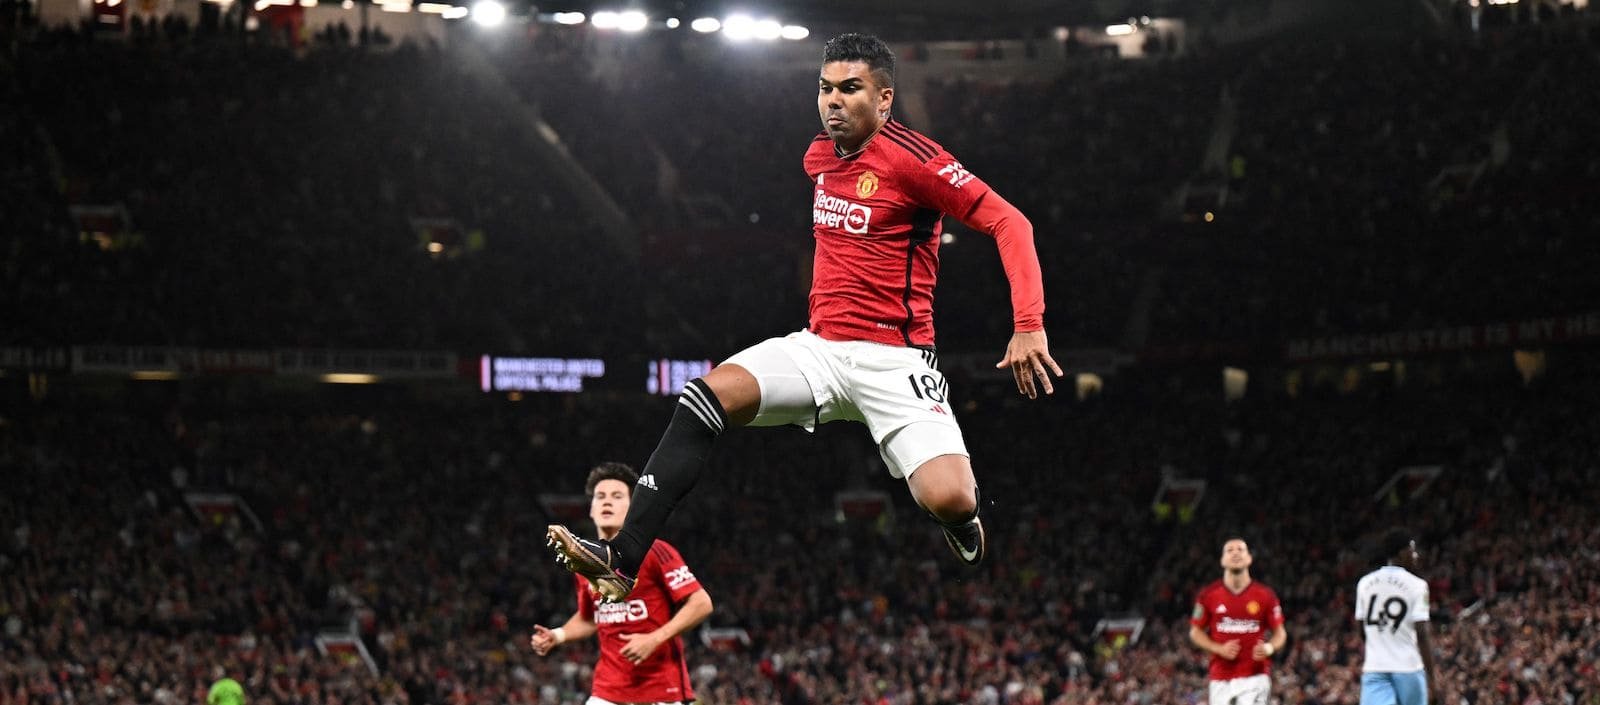 “Very helpful for the team”: Raphael Varane leads charge to defend Casemiro amid poor form – Man United News And Transfer News